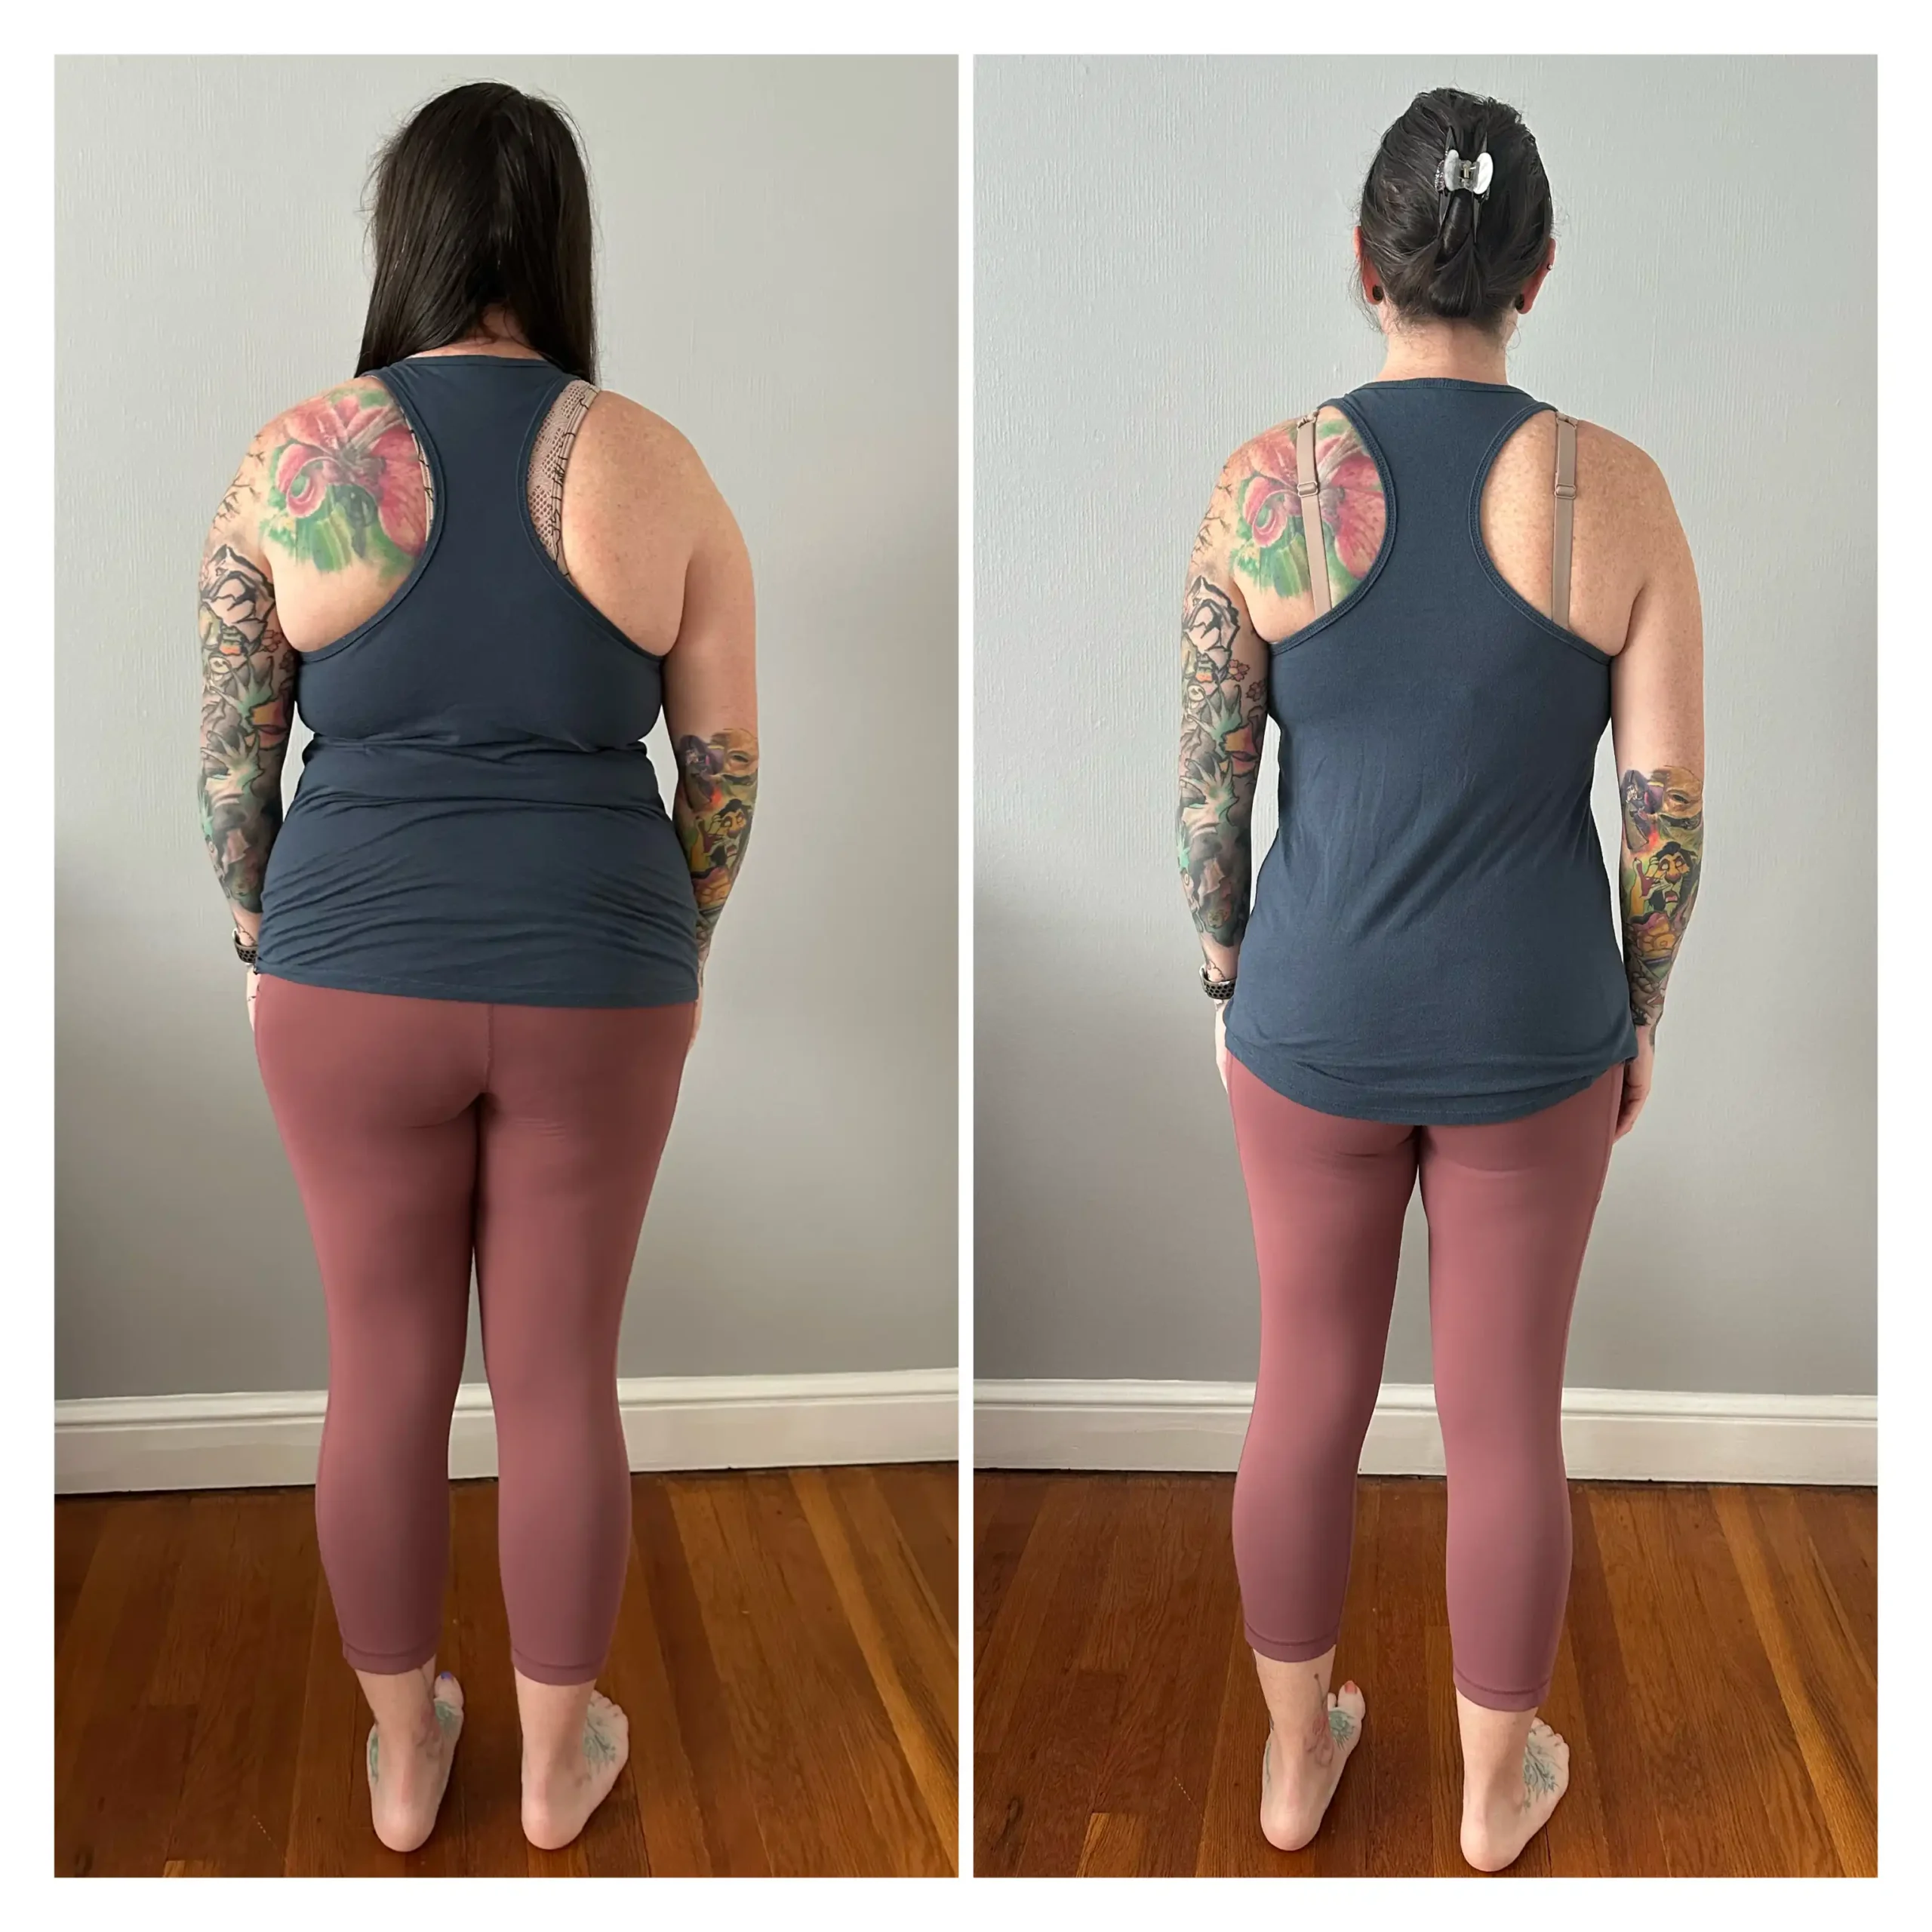 Amber before and after weight loss back view